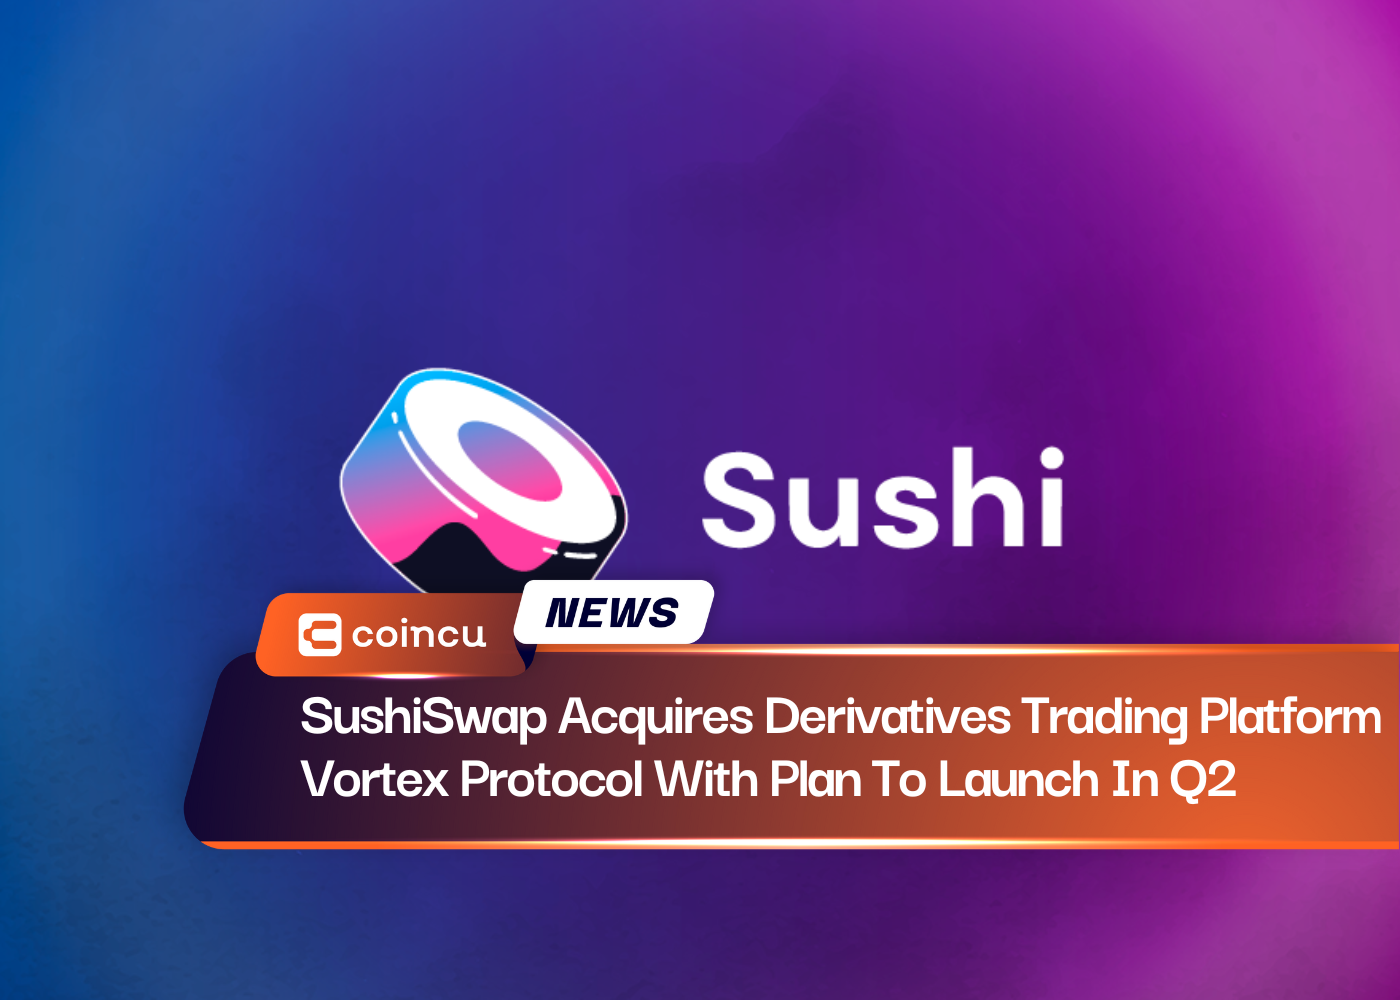 SushiSwap Acquires Derivatives Trading Platform Vortex Protocol With Plan To Launch In Q2